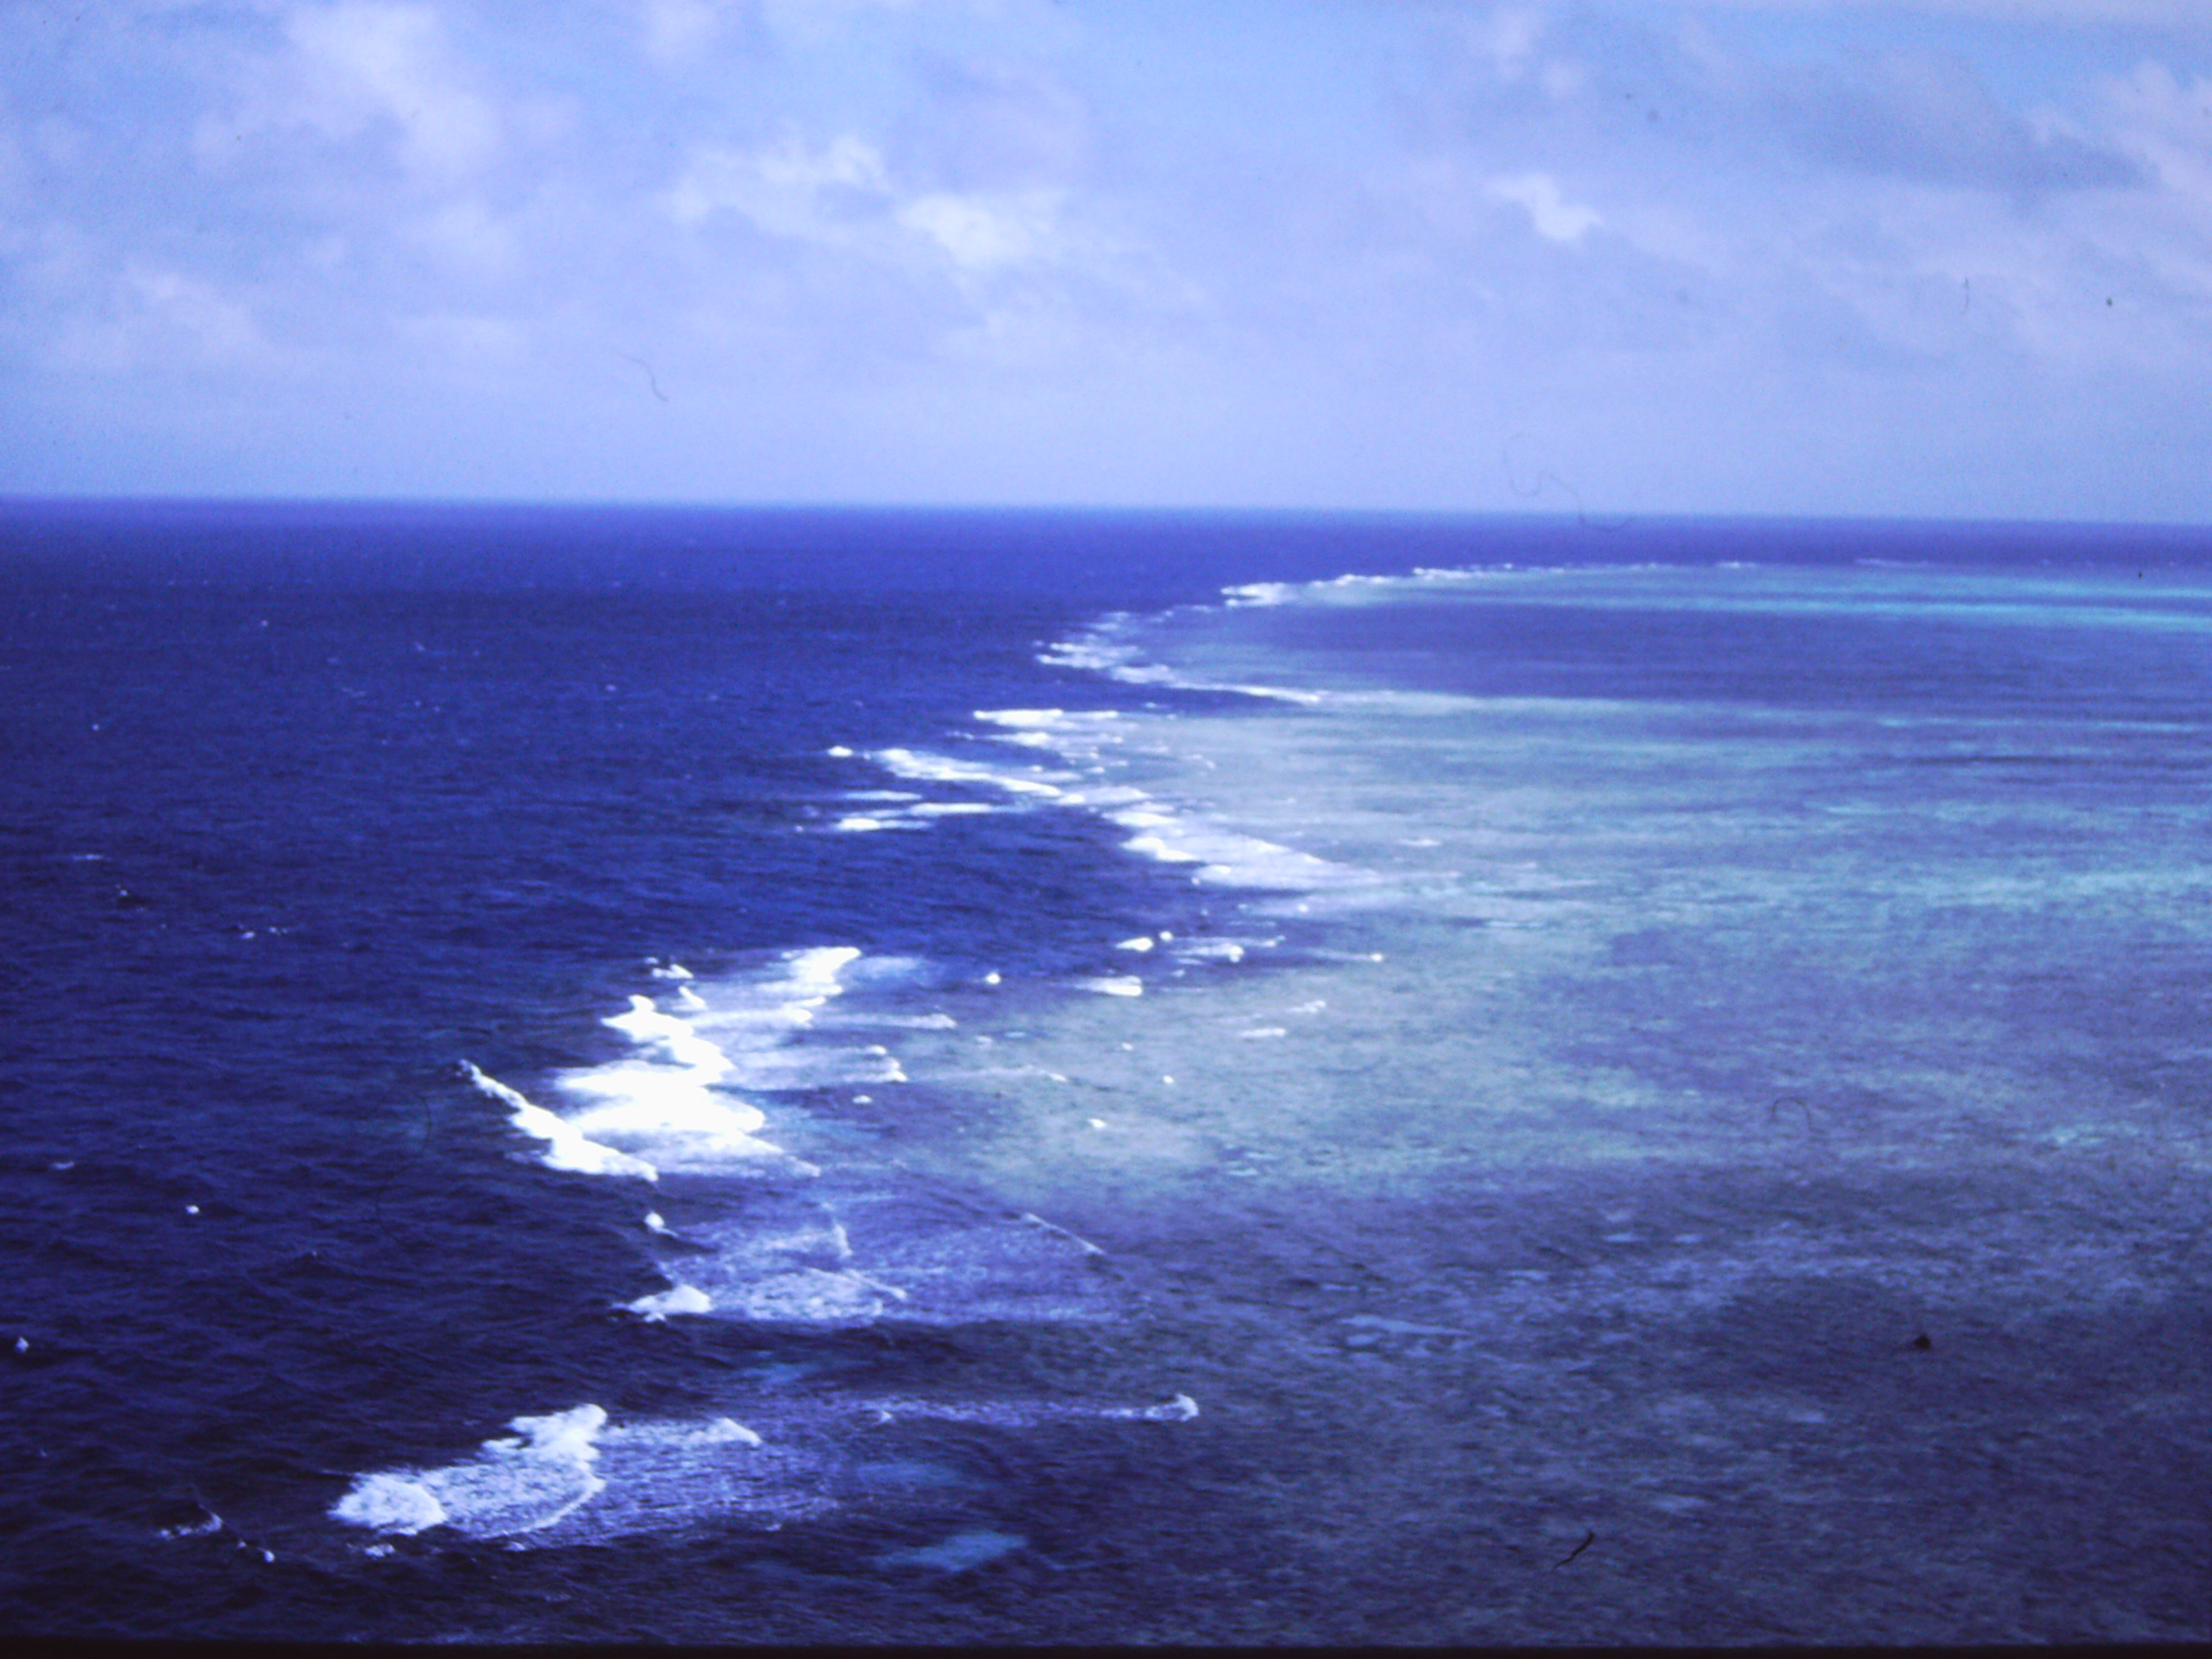 remarkably attenuator Barrier Blog Great wave – Geophysics is Geology efficient Reef a &